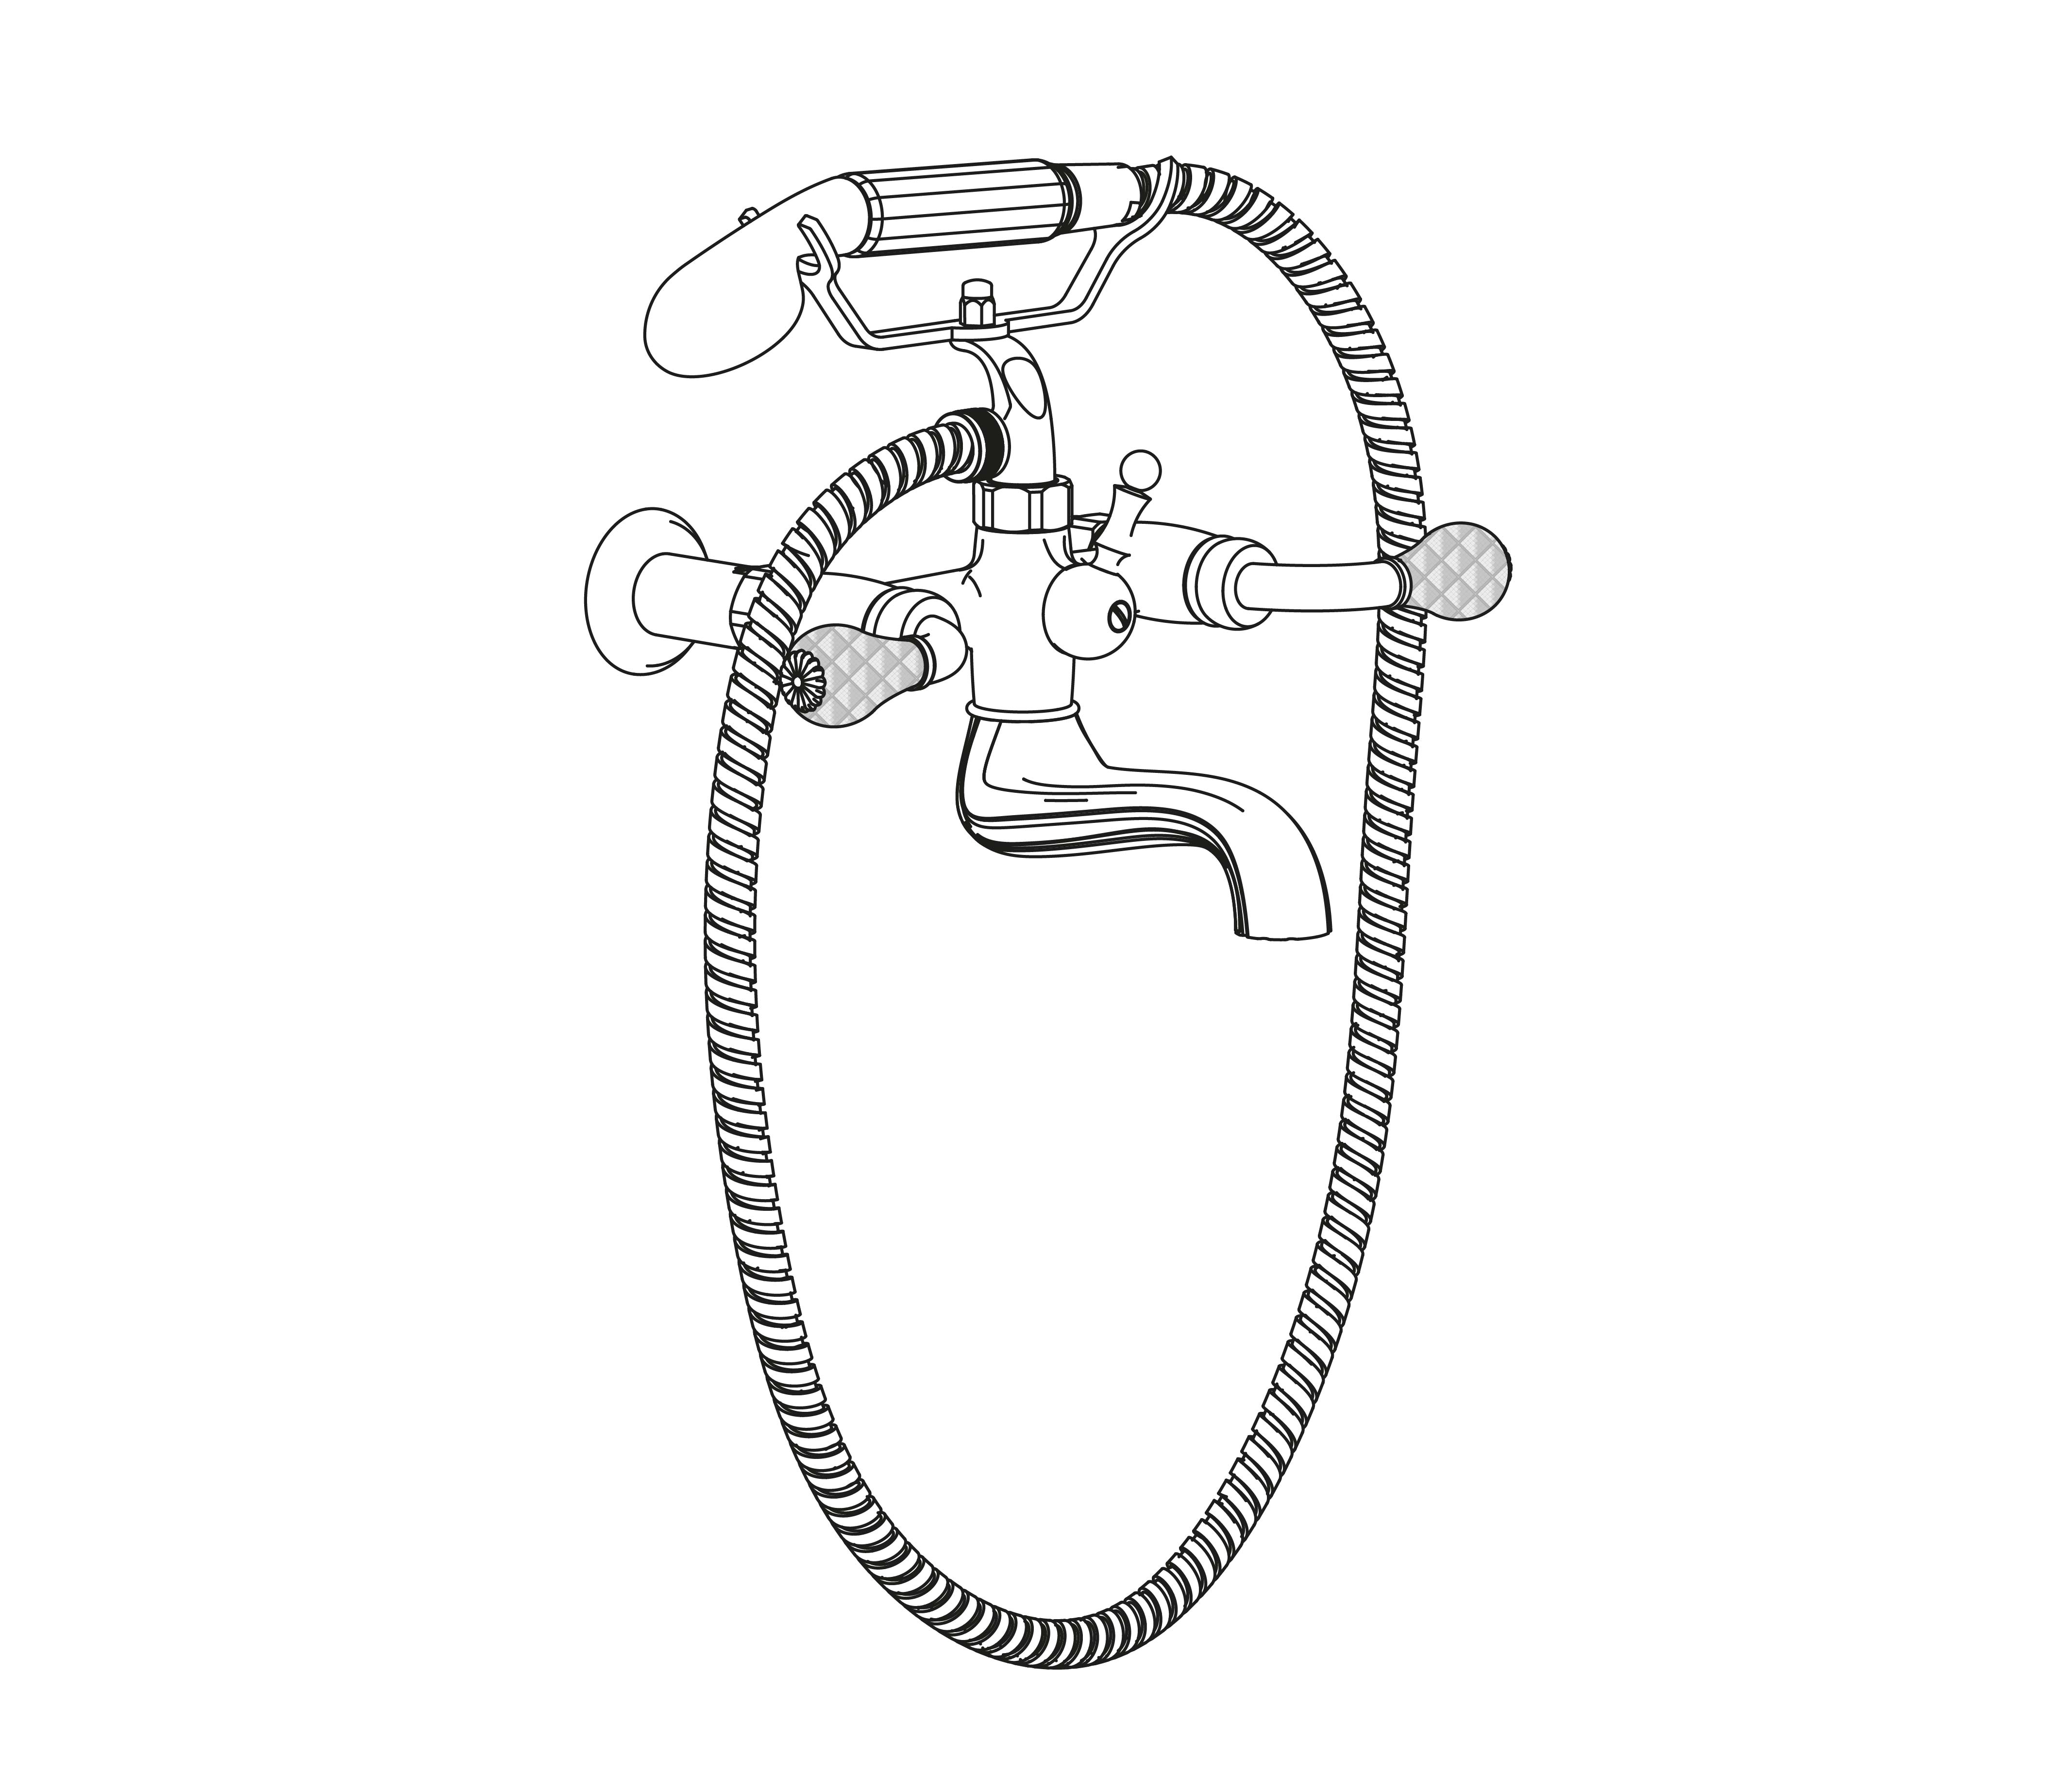 C62-3201 Wall mounted bath and shower mixer